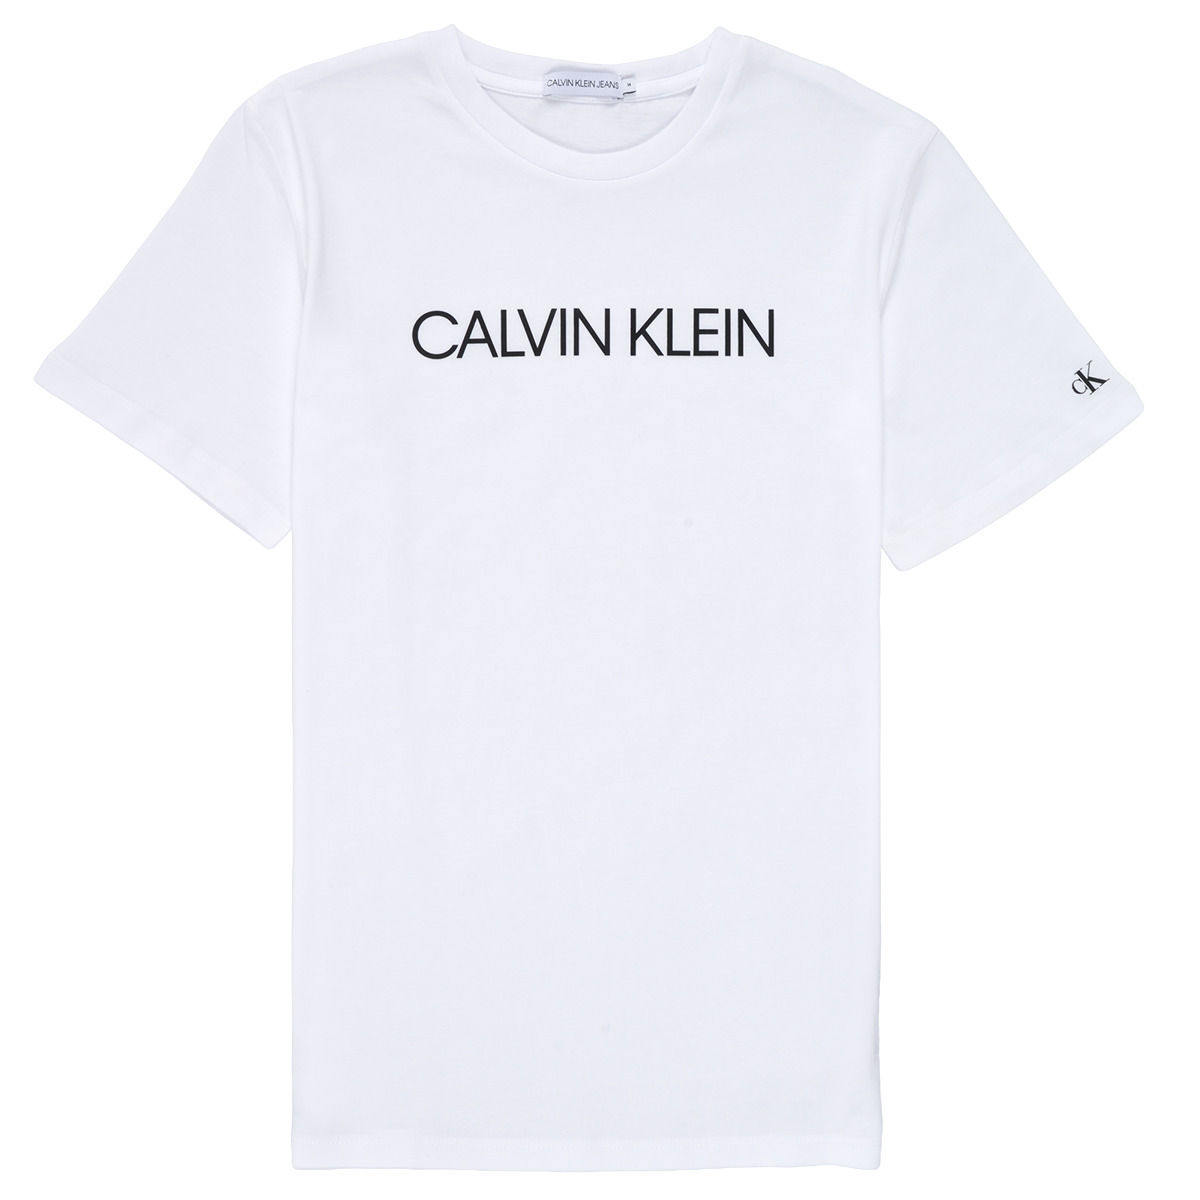 Calvin Klein Jeans INSTITUTIONAL T-SHIRT short-sleeved delivery Clothing Child ! t-shirts - - NET White | Free Spartoo